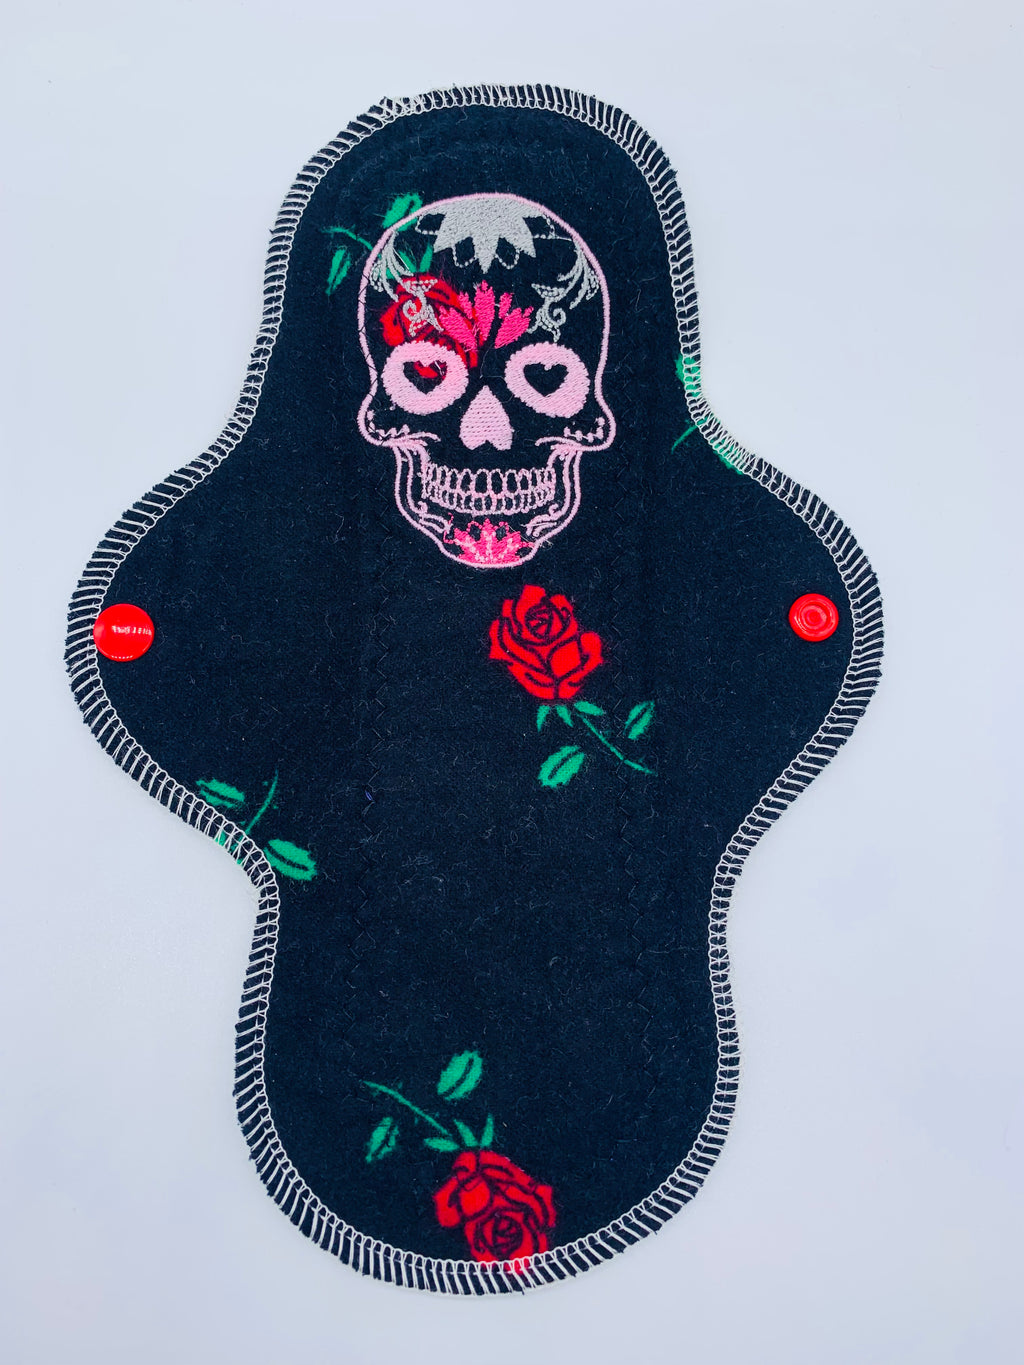 10” moderate flow PUL cloth reusable pad “roses and bones”